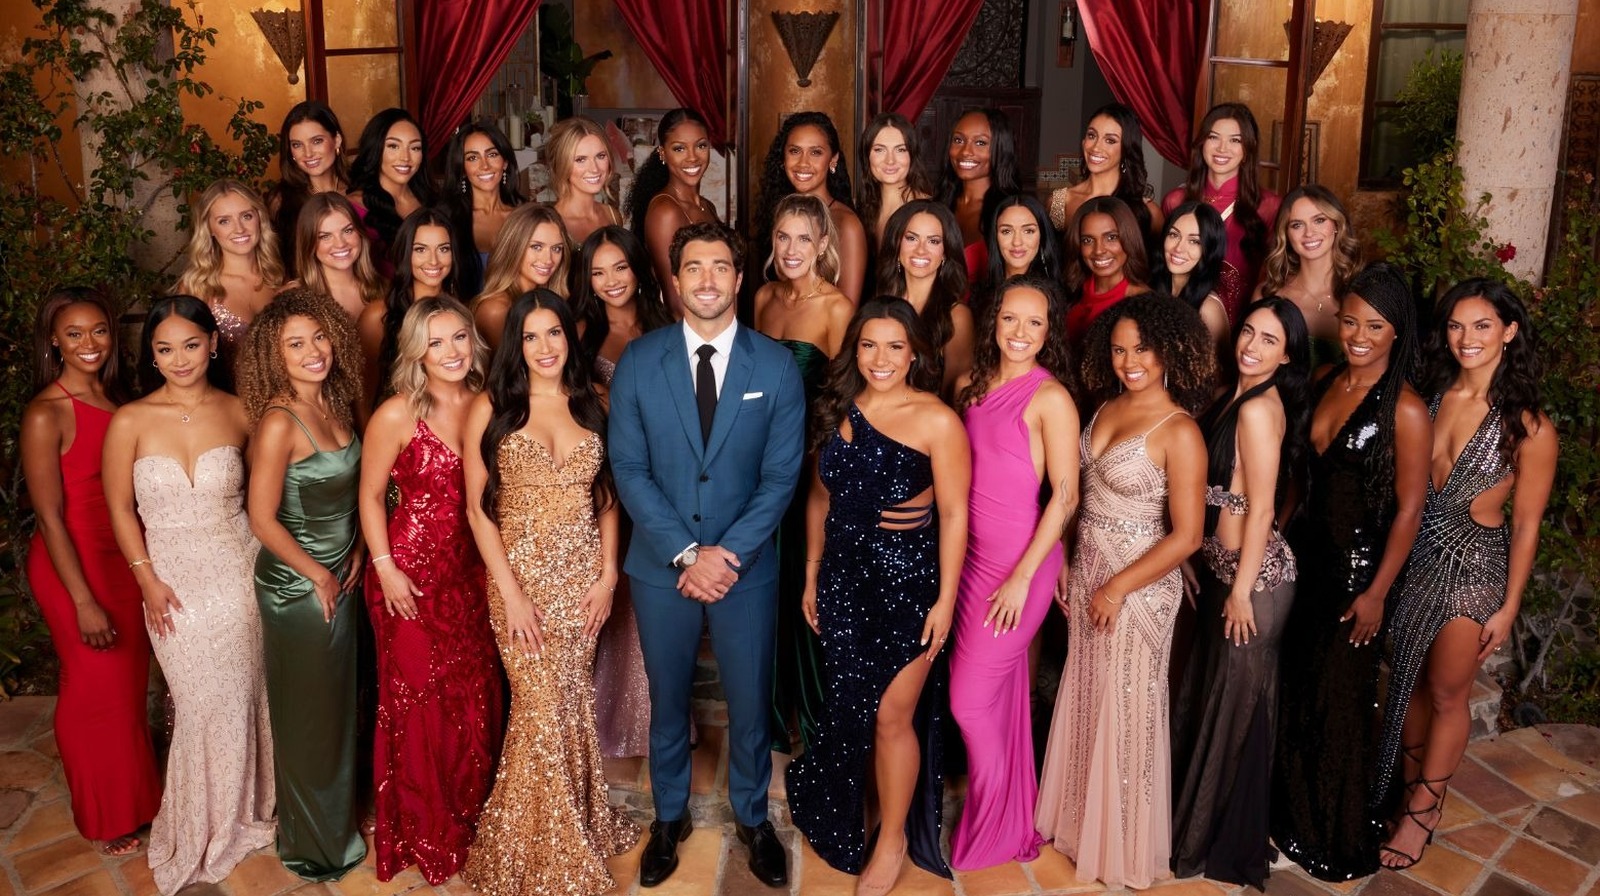 A Bachelor Contestant Has Ties To Donald Trump & Reddit Has A Lot To